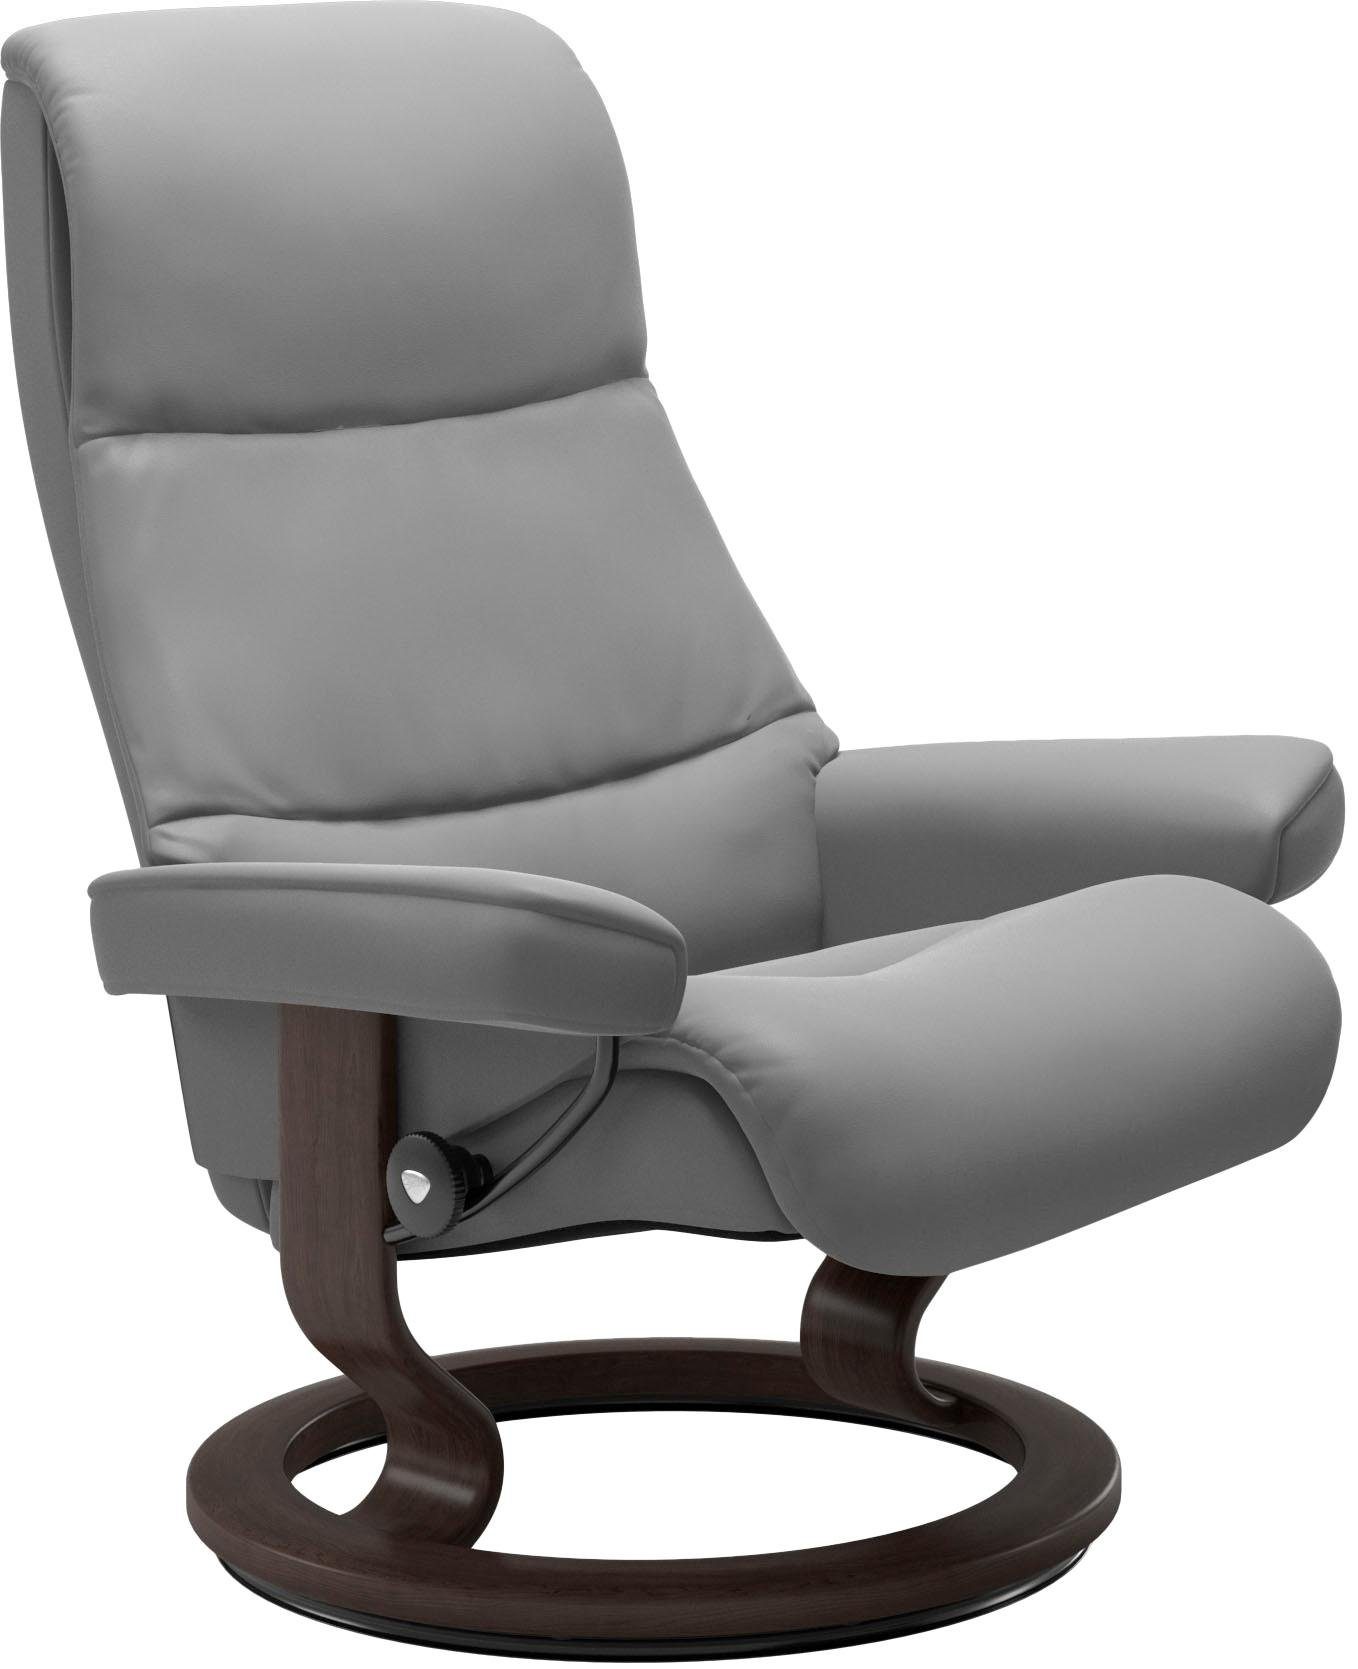 Stressless® Relaxsessel Base, Classic Wenge View, S,Gestell mit Größe